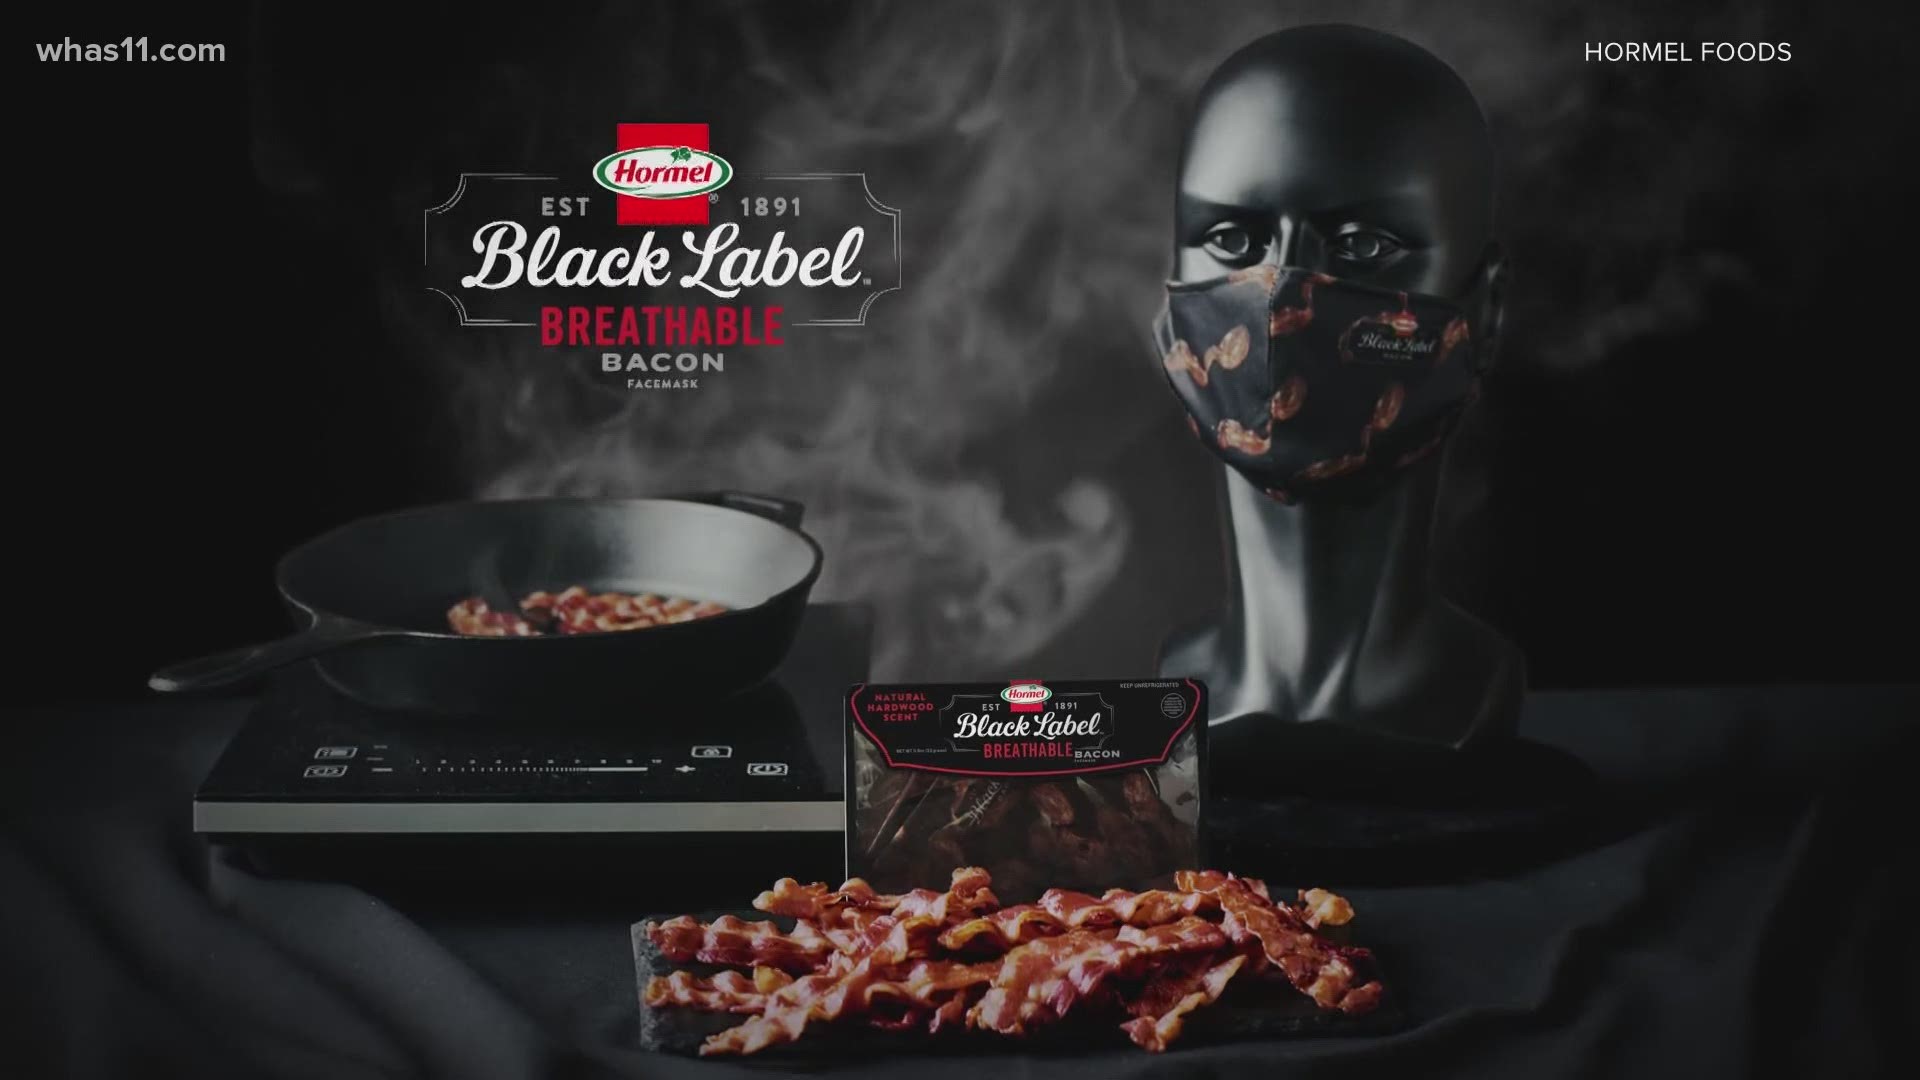 The "Black Label Breathable Bacon" is made with the "latest in in pork-scented technology," according to a press release.